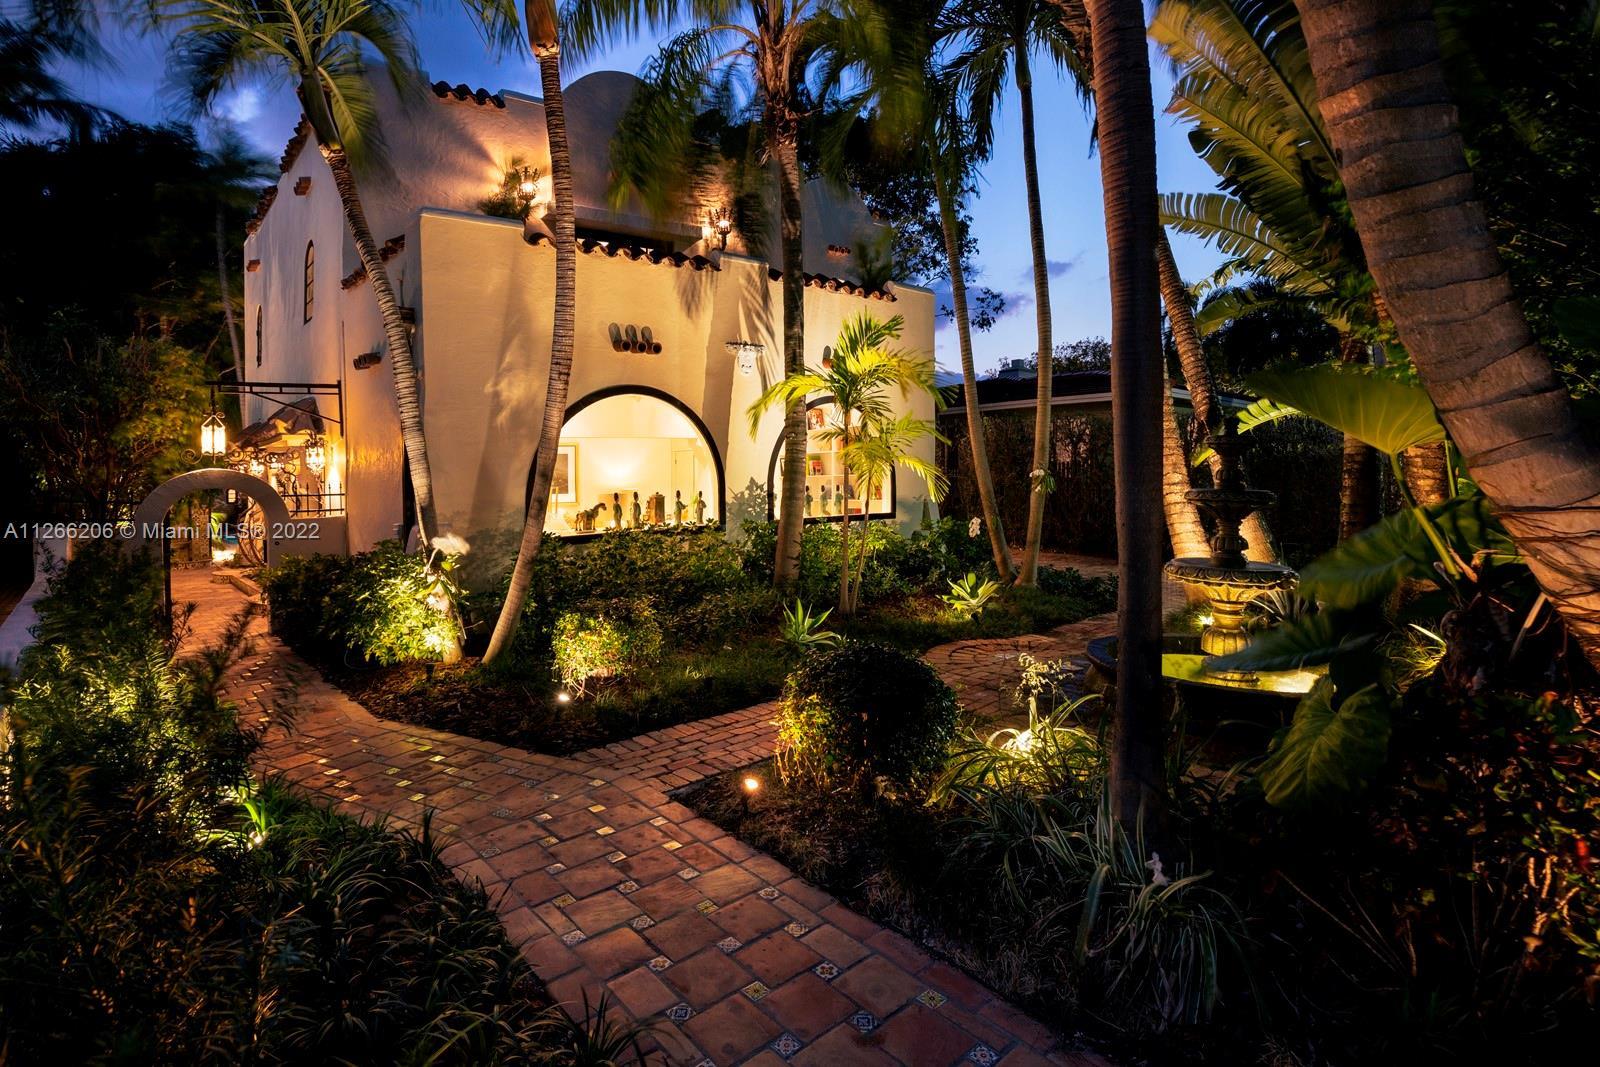 Welcome to Le Castellet. Your private Miami Beach retreat. Built in 1926, preserved & authentically 